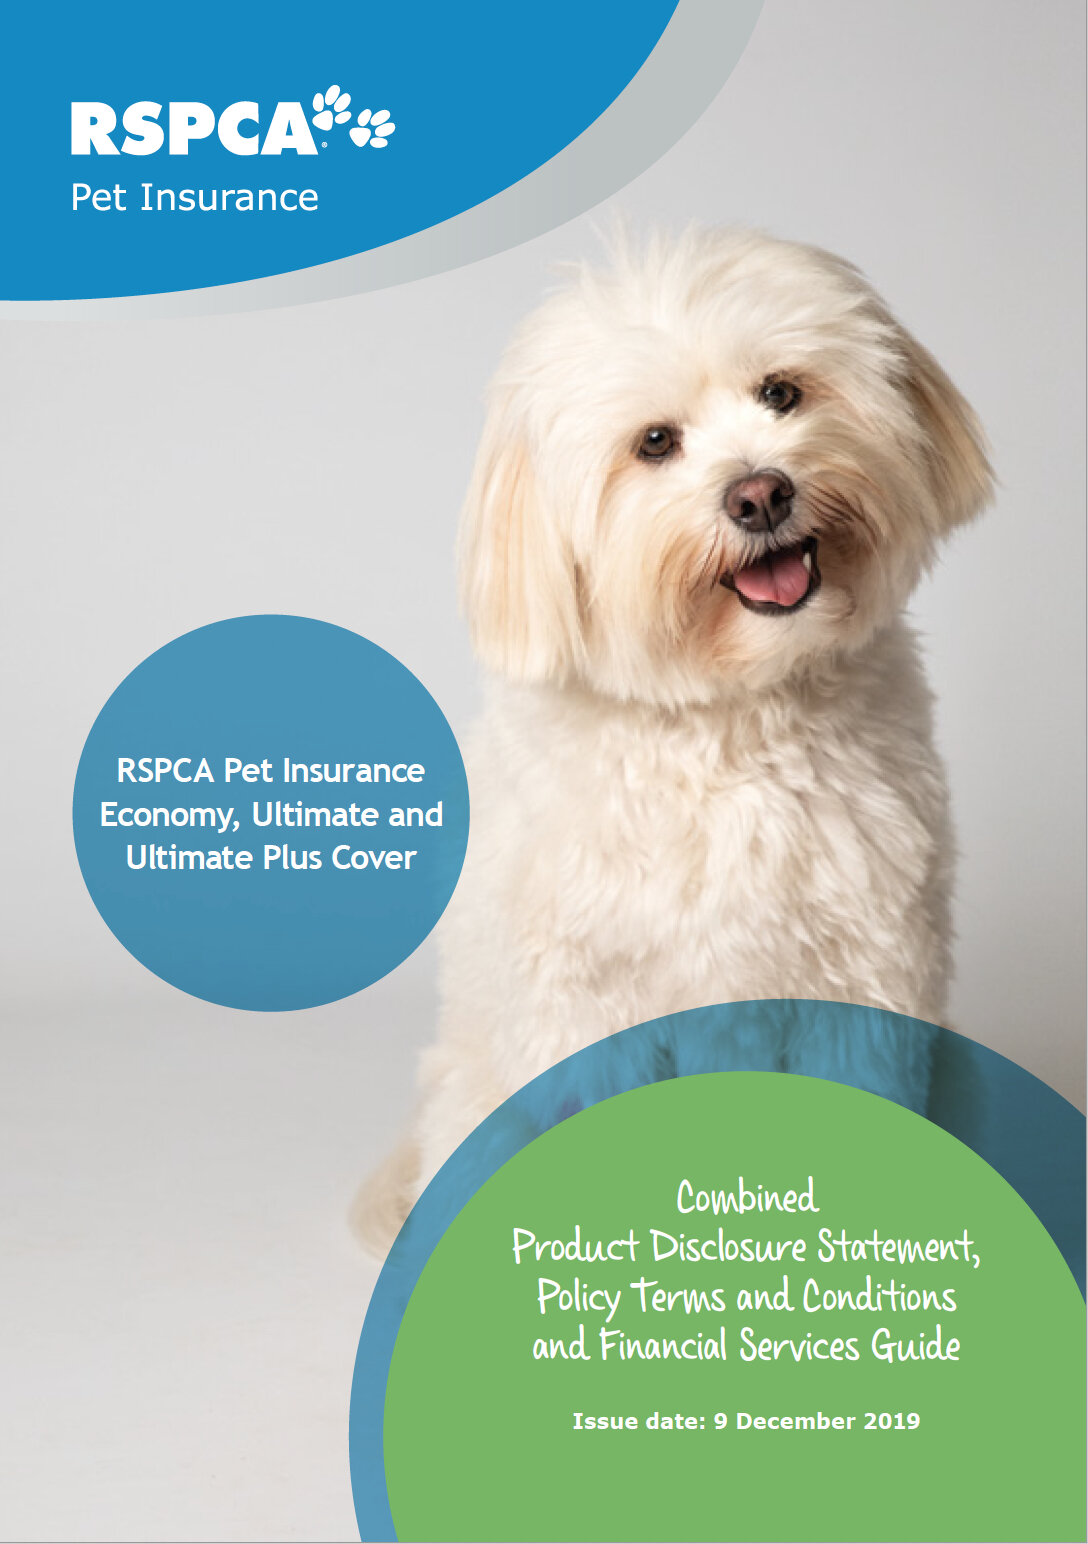  Insurance Photography For Dogs